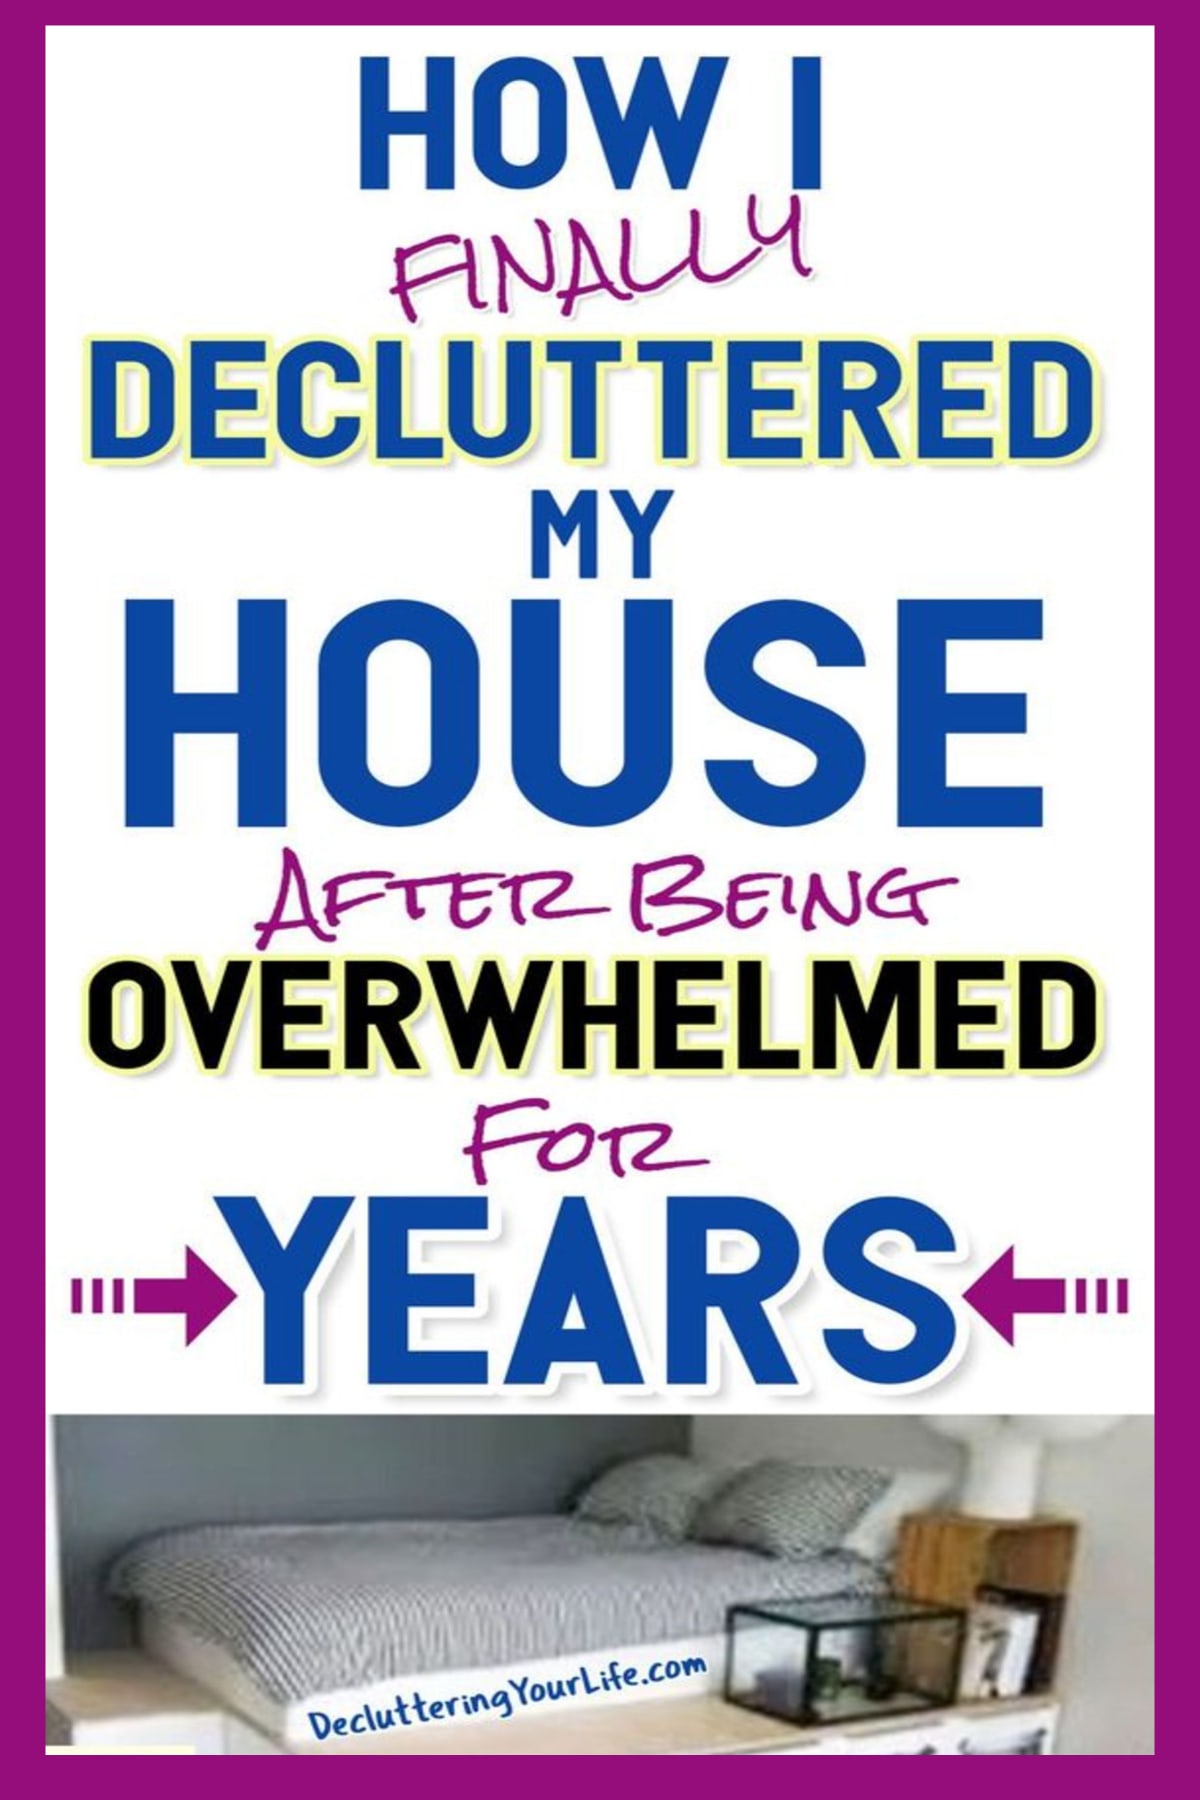 How I finally decluttered my house after being overwhelmed for YEARS